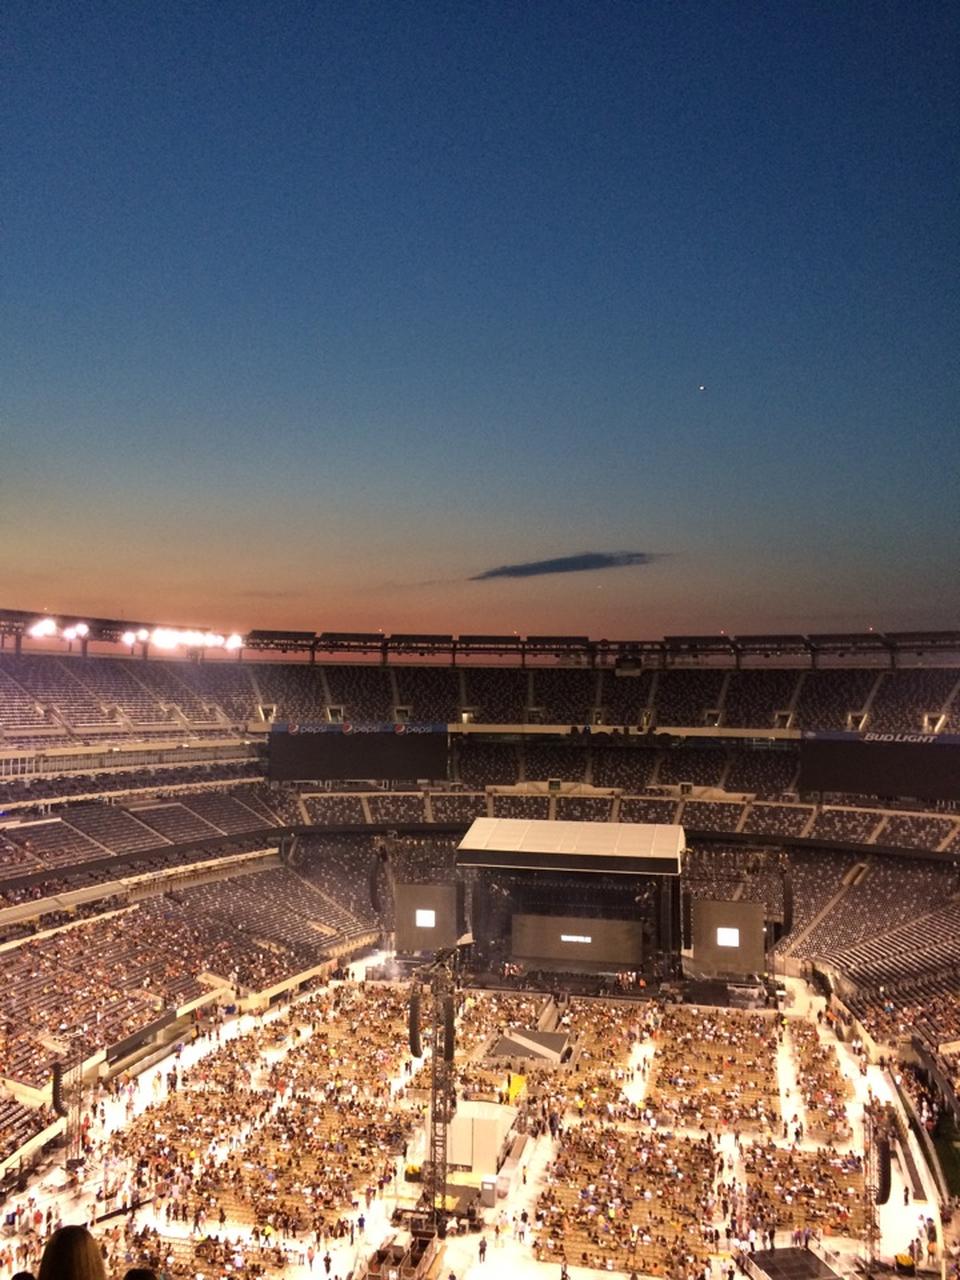 section 324 seat view  for concert - metlife stadium